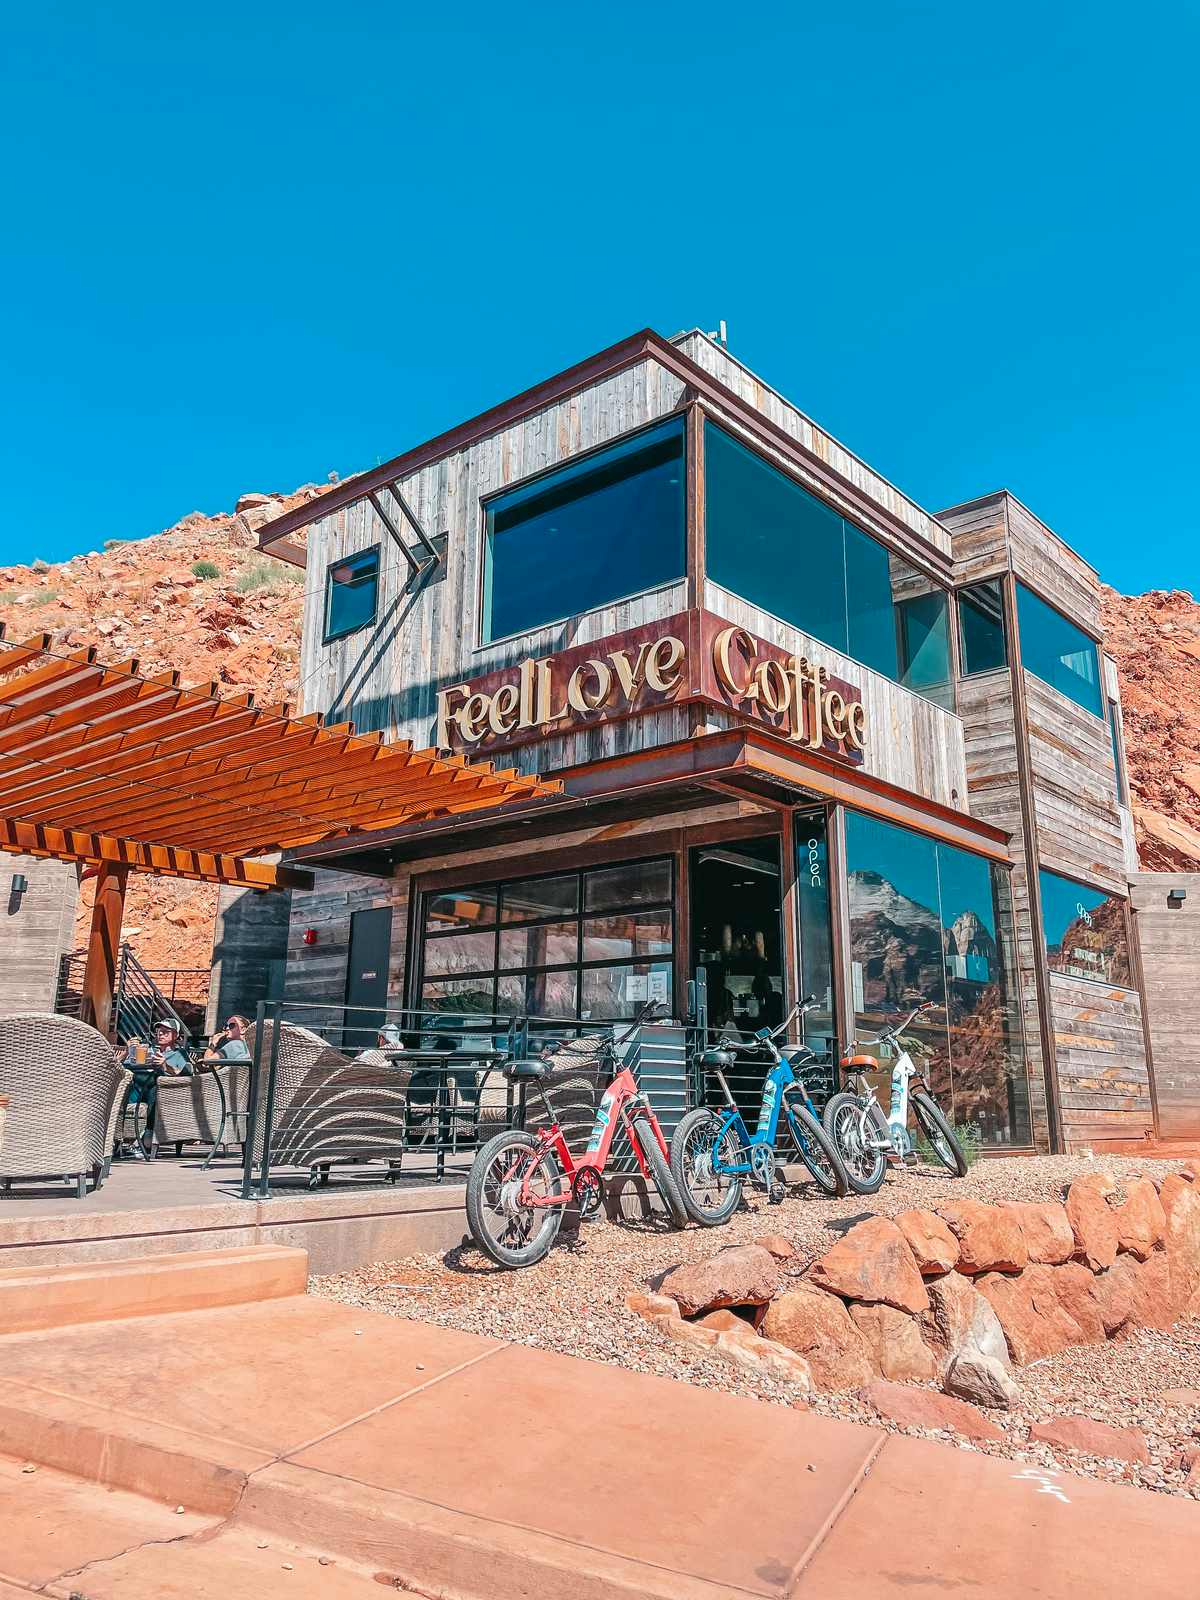 FeelLove Coffee in Zion National Park in Utah